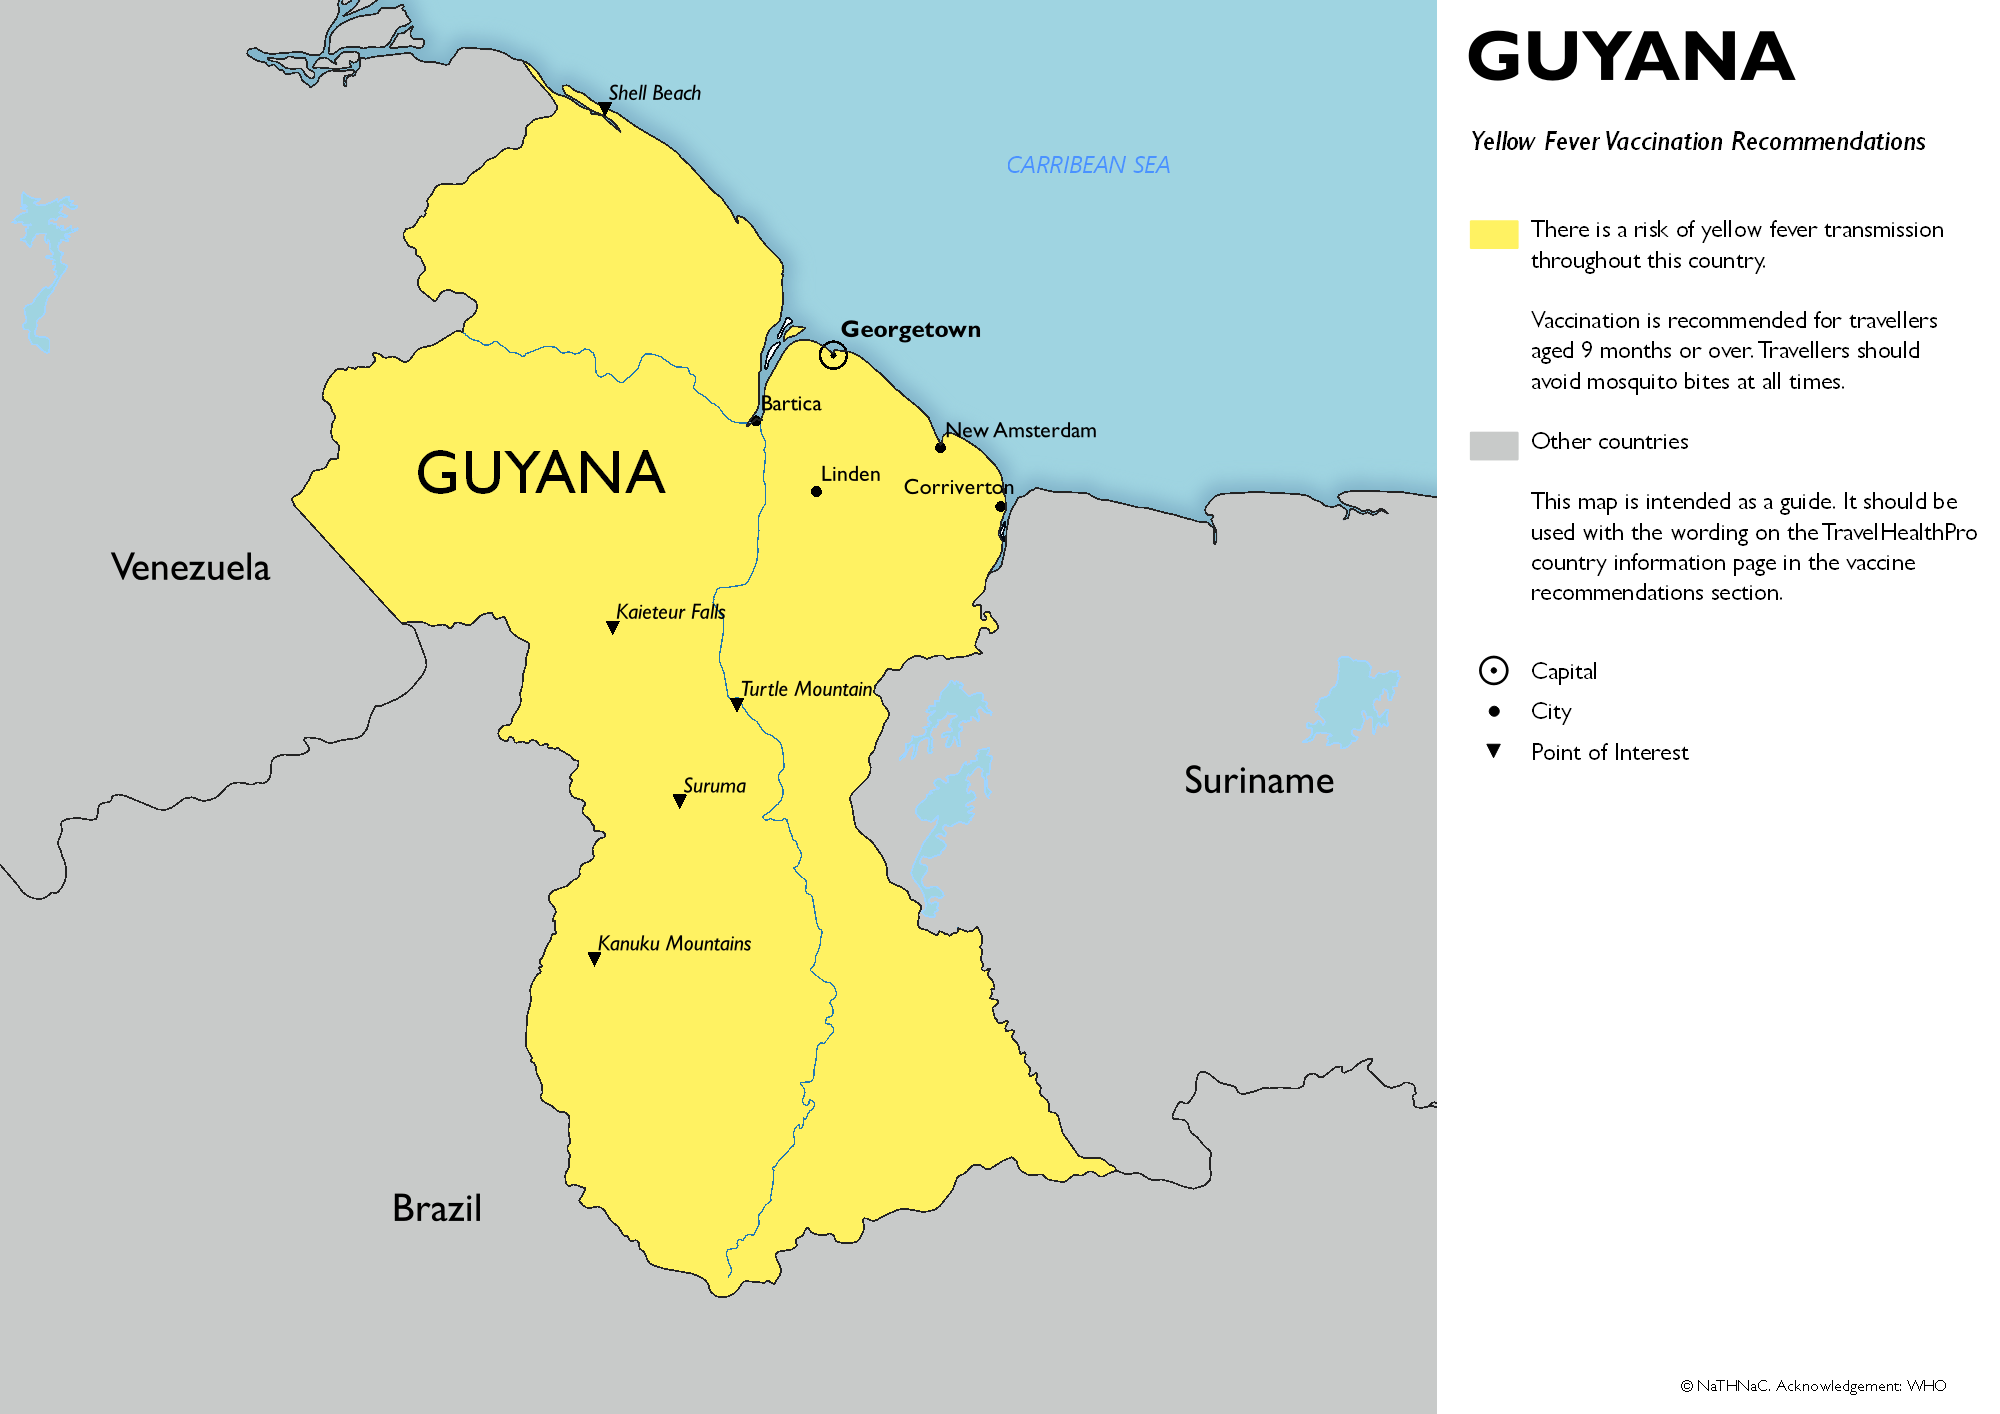 Yellow fever vaccine recommendation map for Guyana